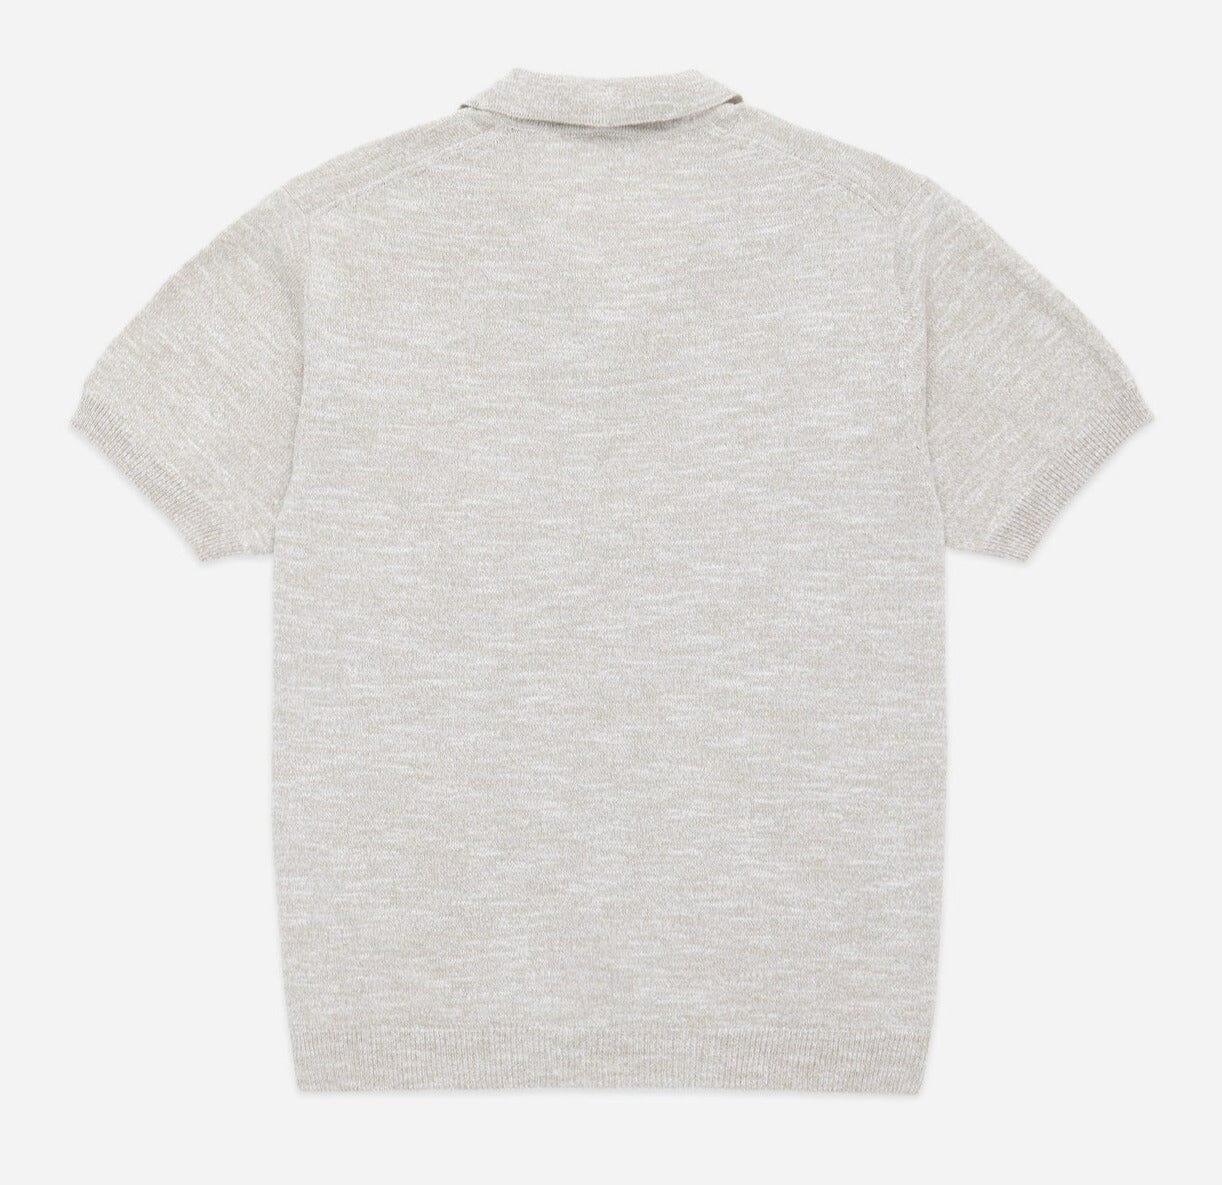 3sixteen - Knit Polo Natural Marled Yarn - City Workshop Men's Supply Co.